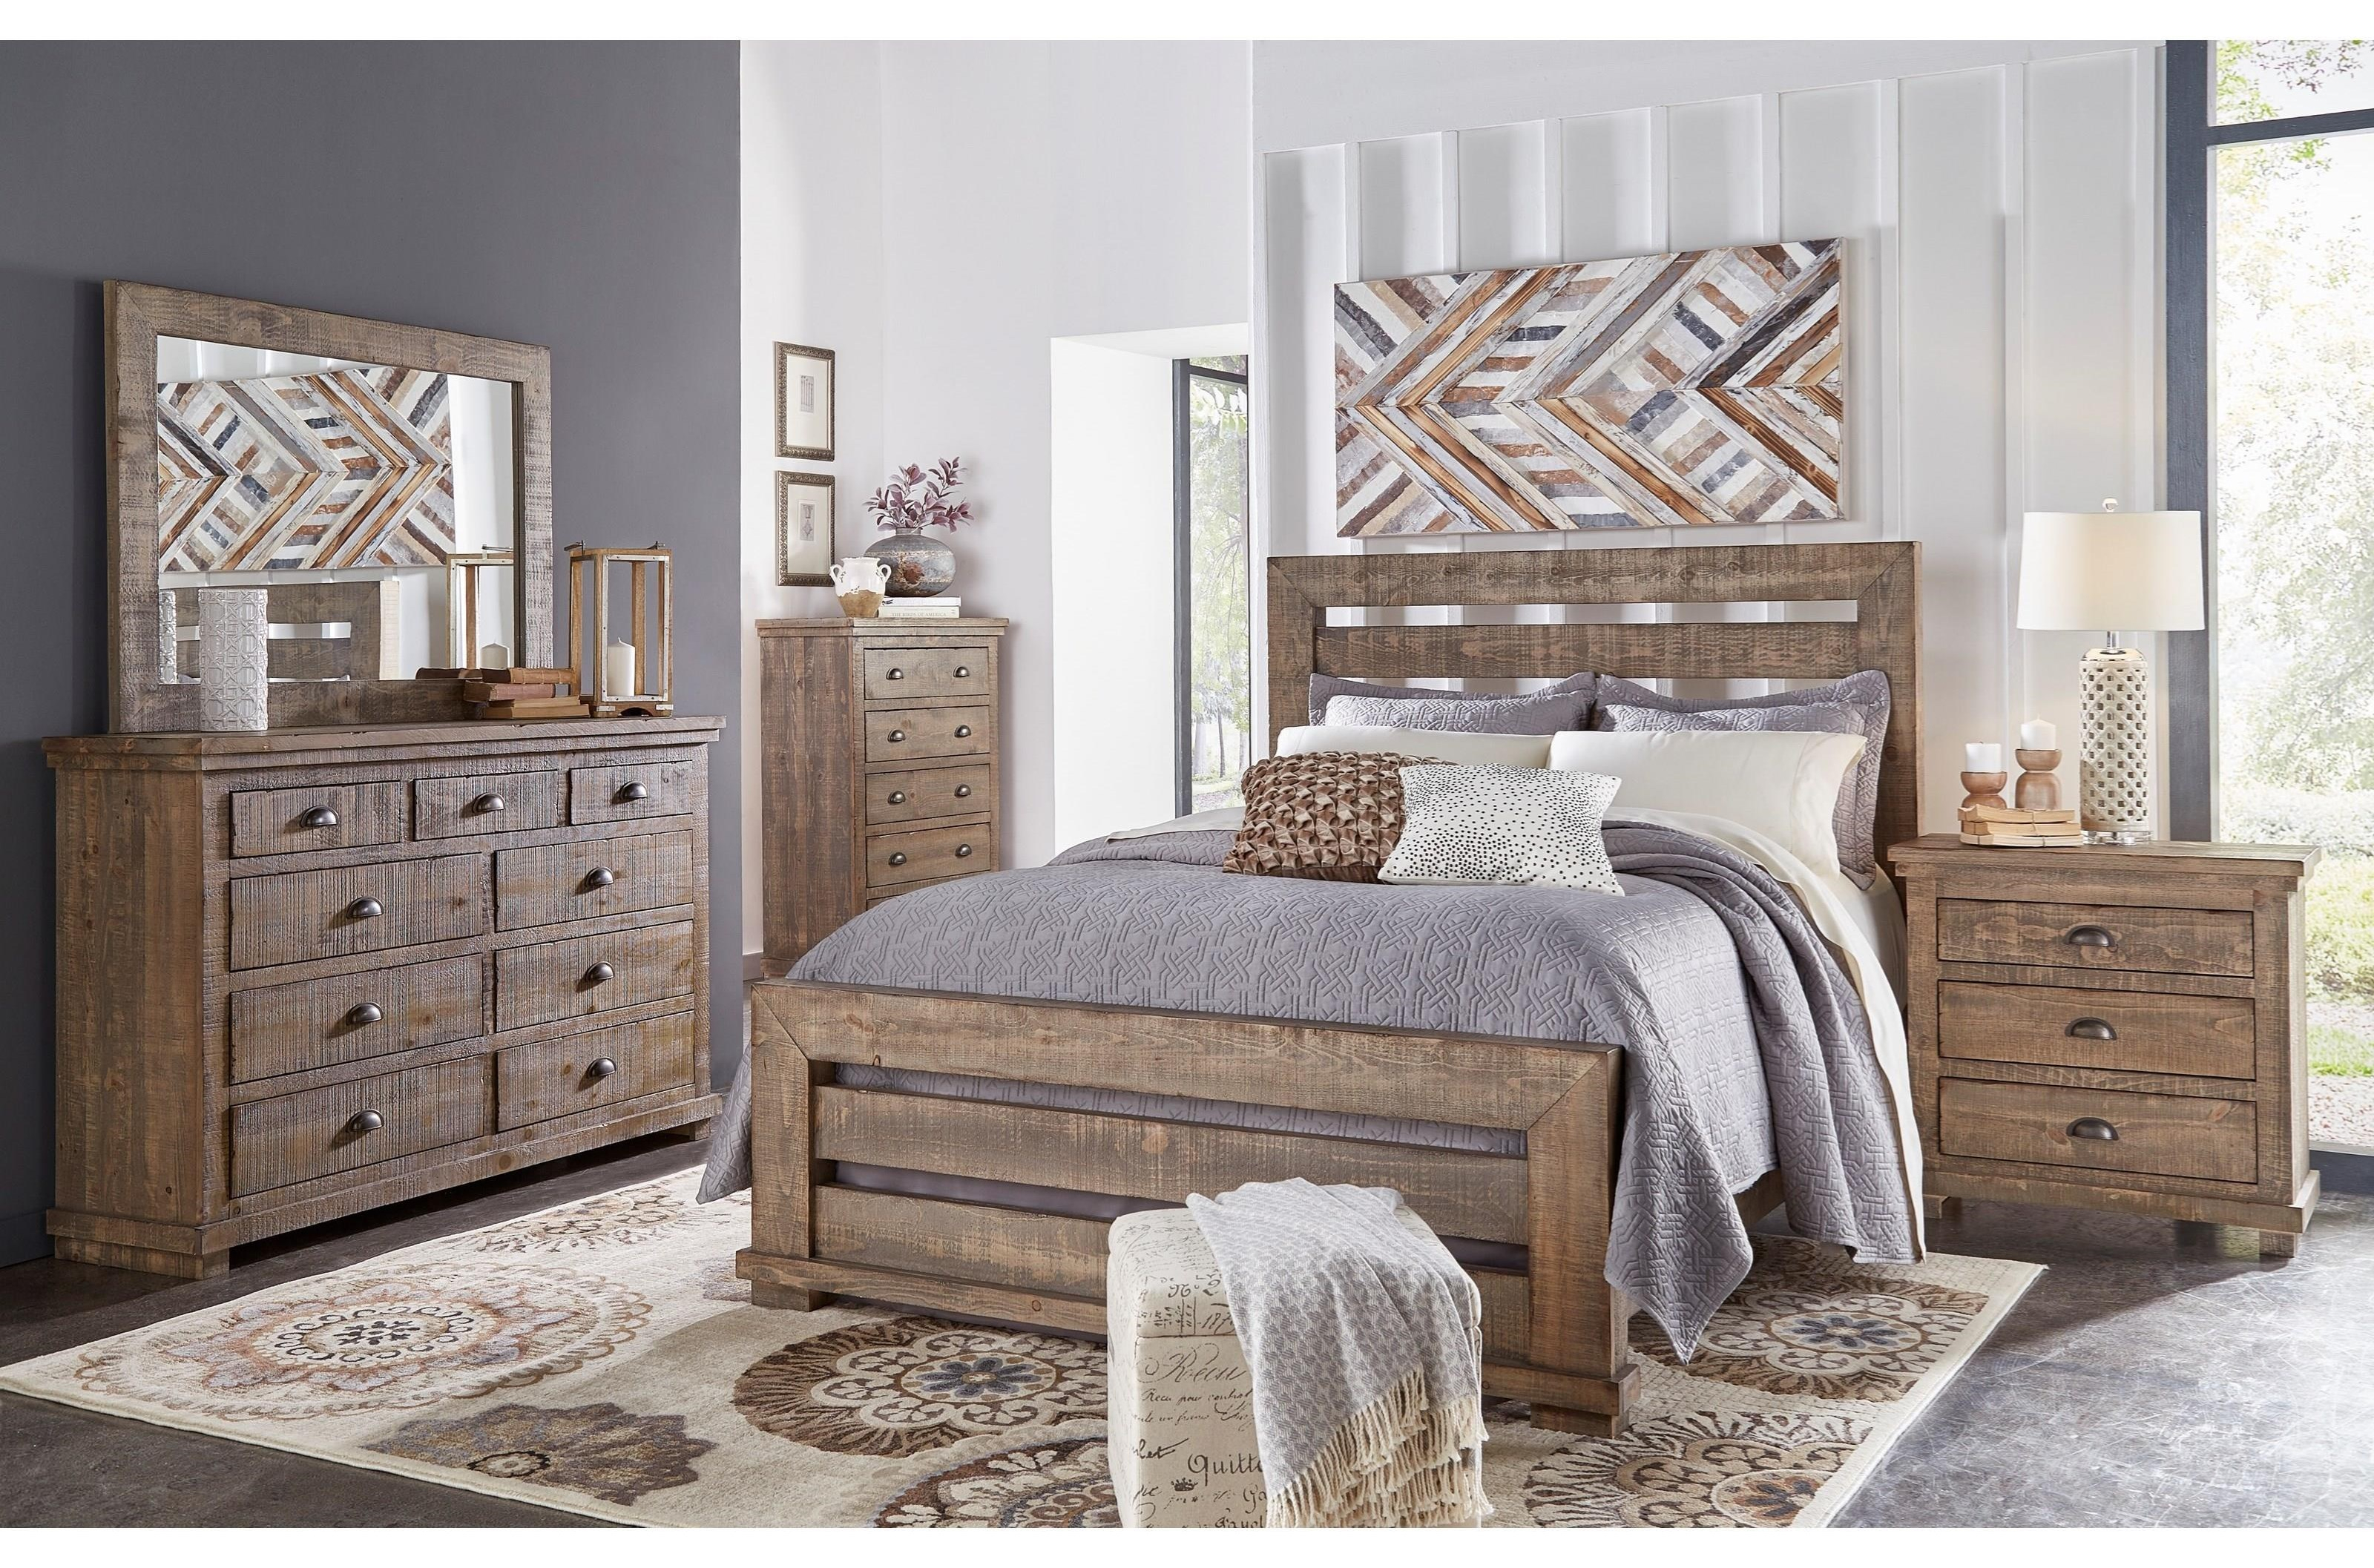 Willow 6 Piece King Bedroom Group Progressive Furniture At Sam Levitz Furniture intended for proportions 3200 X 2114